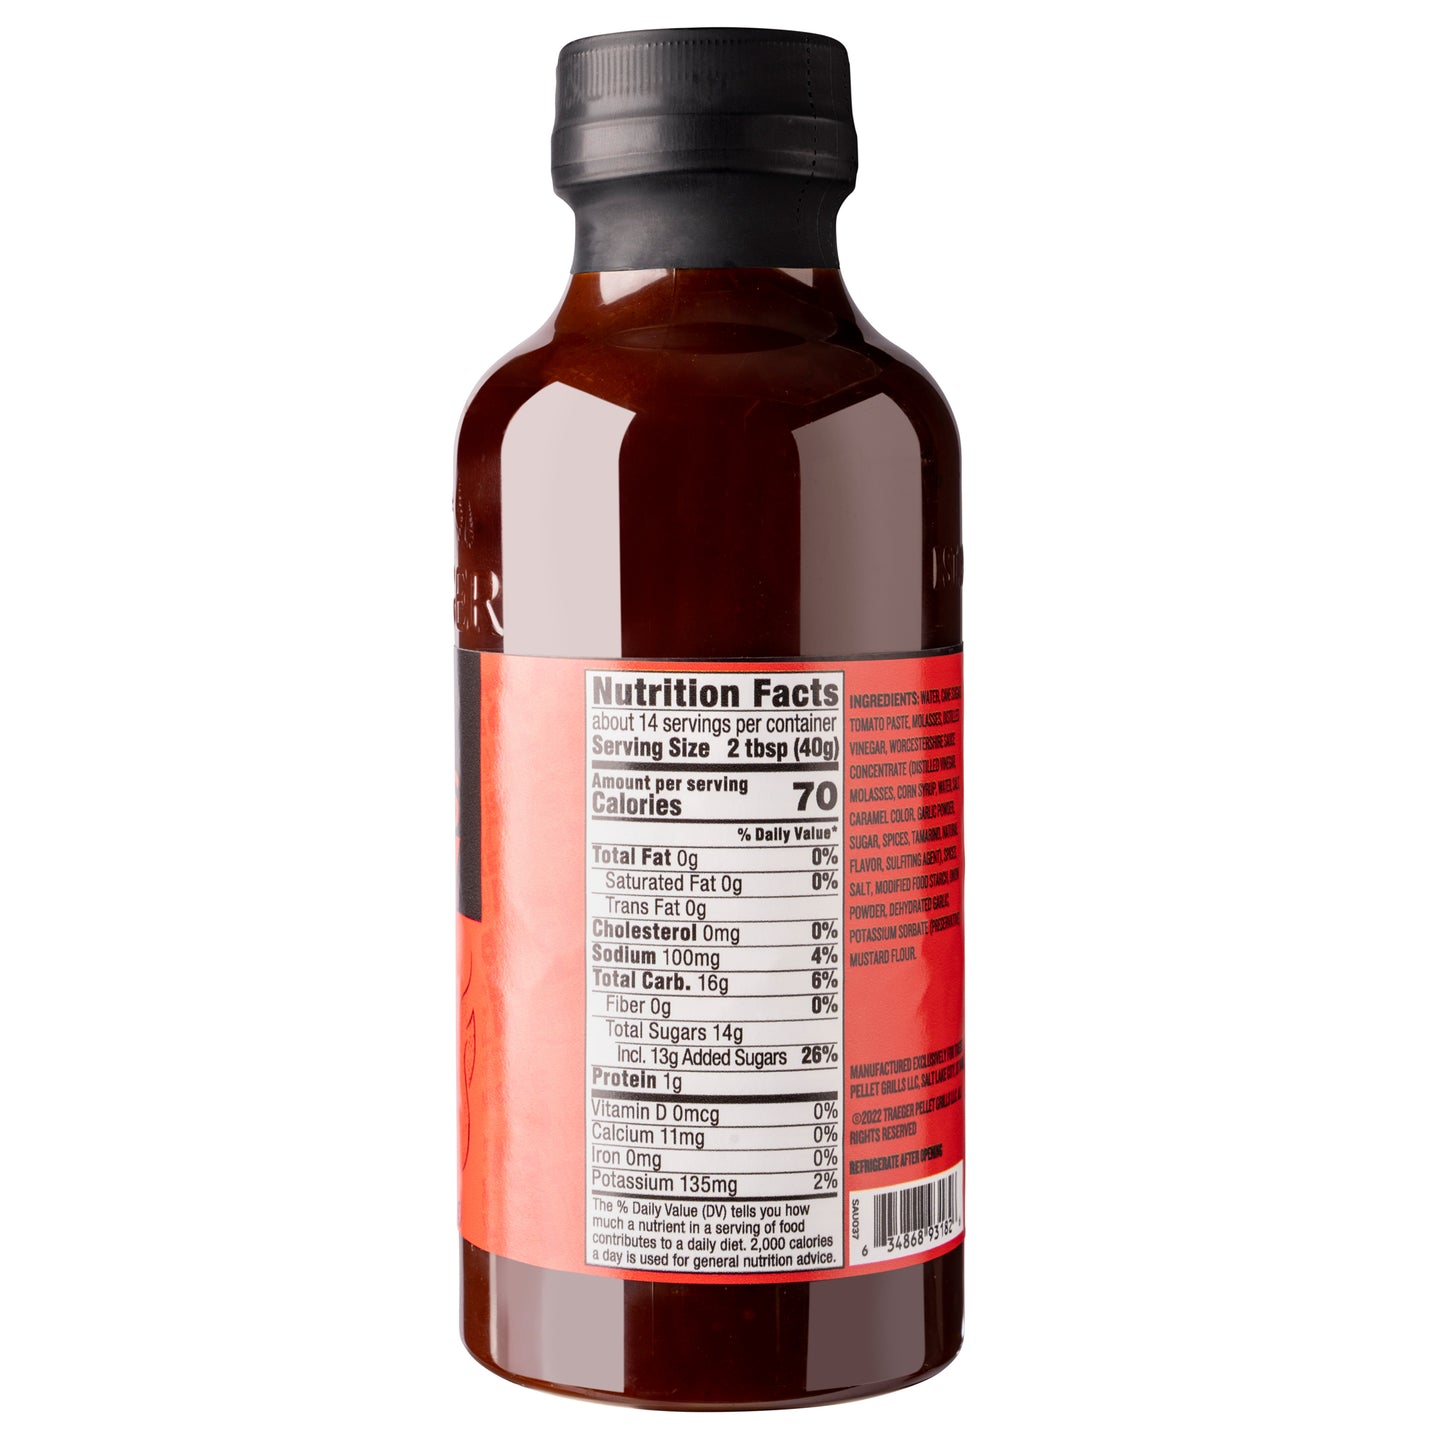 Texas Spicy bbq sauce is 70 calories per serving.